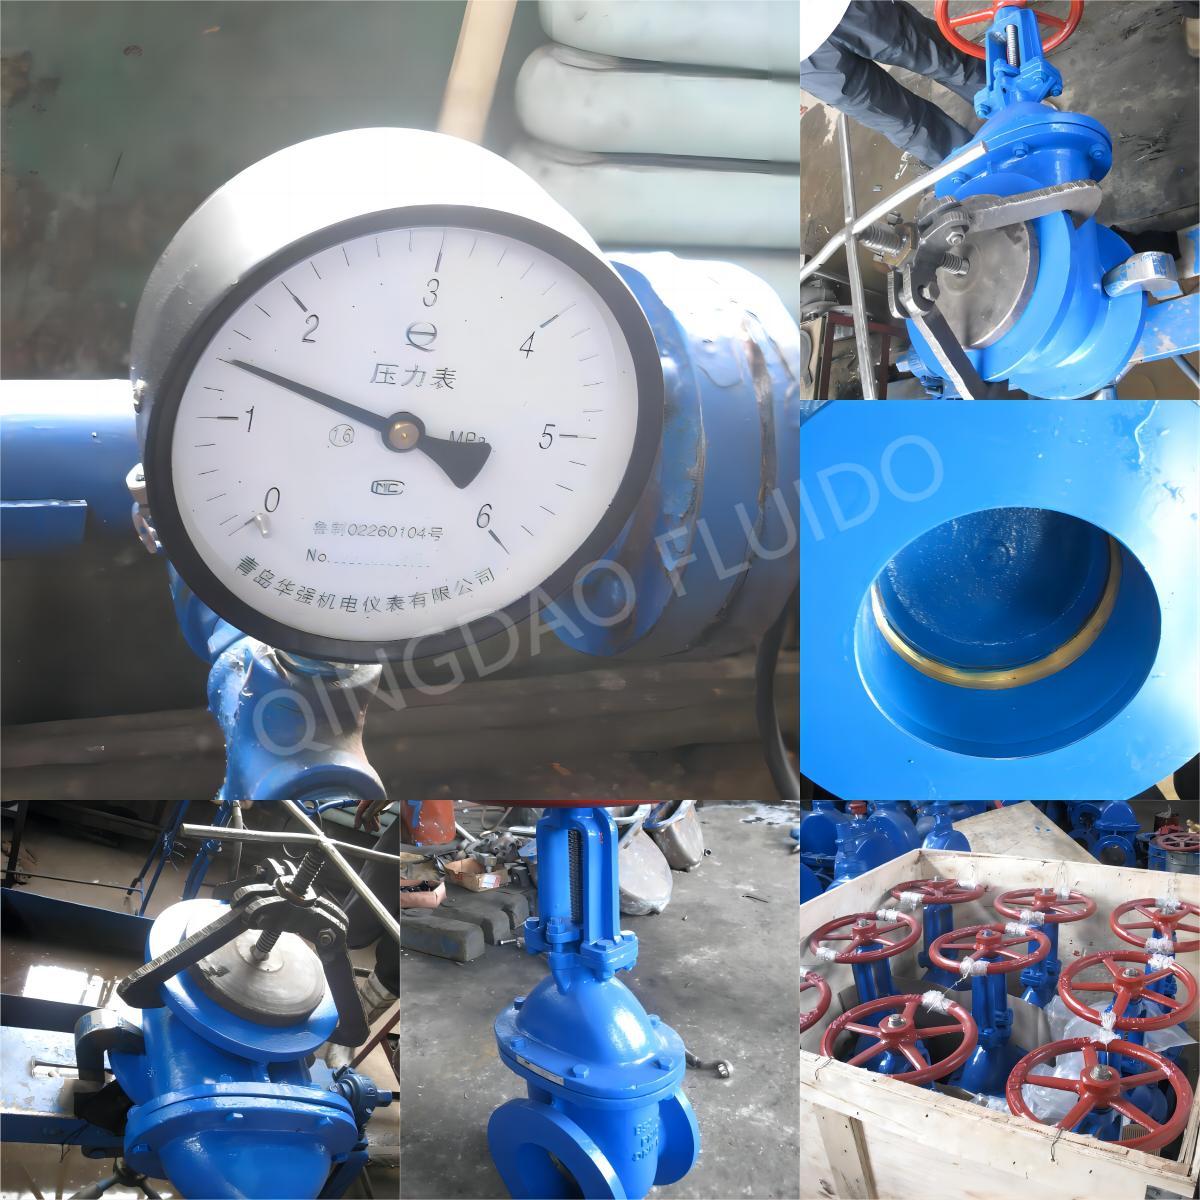 Cast iron BS3464 gate valve BS10 Table E Pressure Tested & Shipped